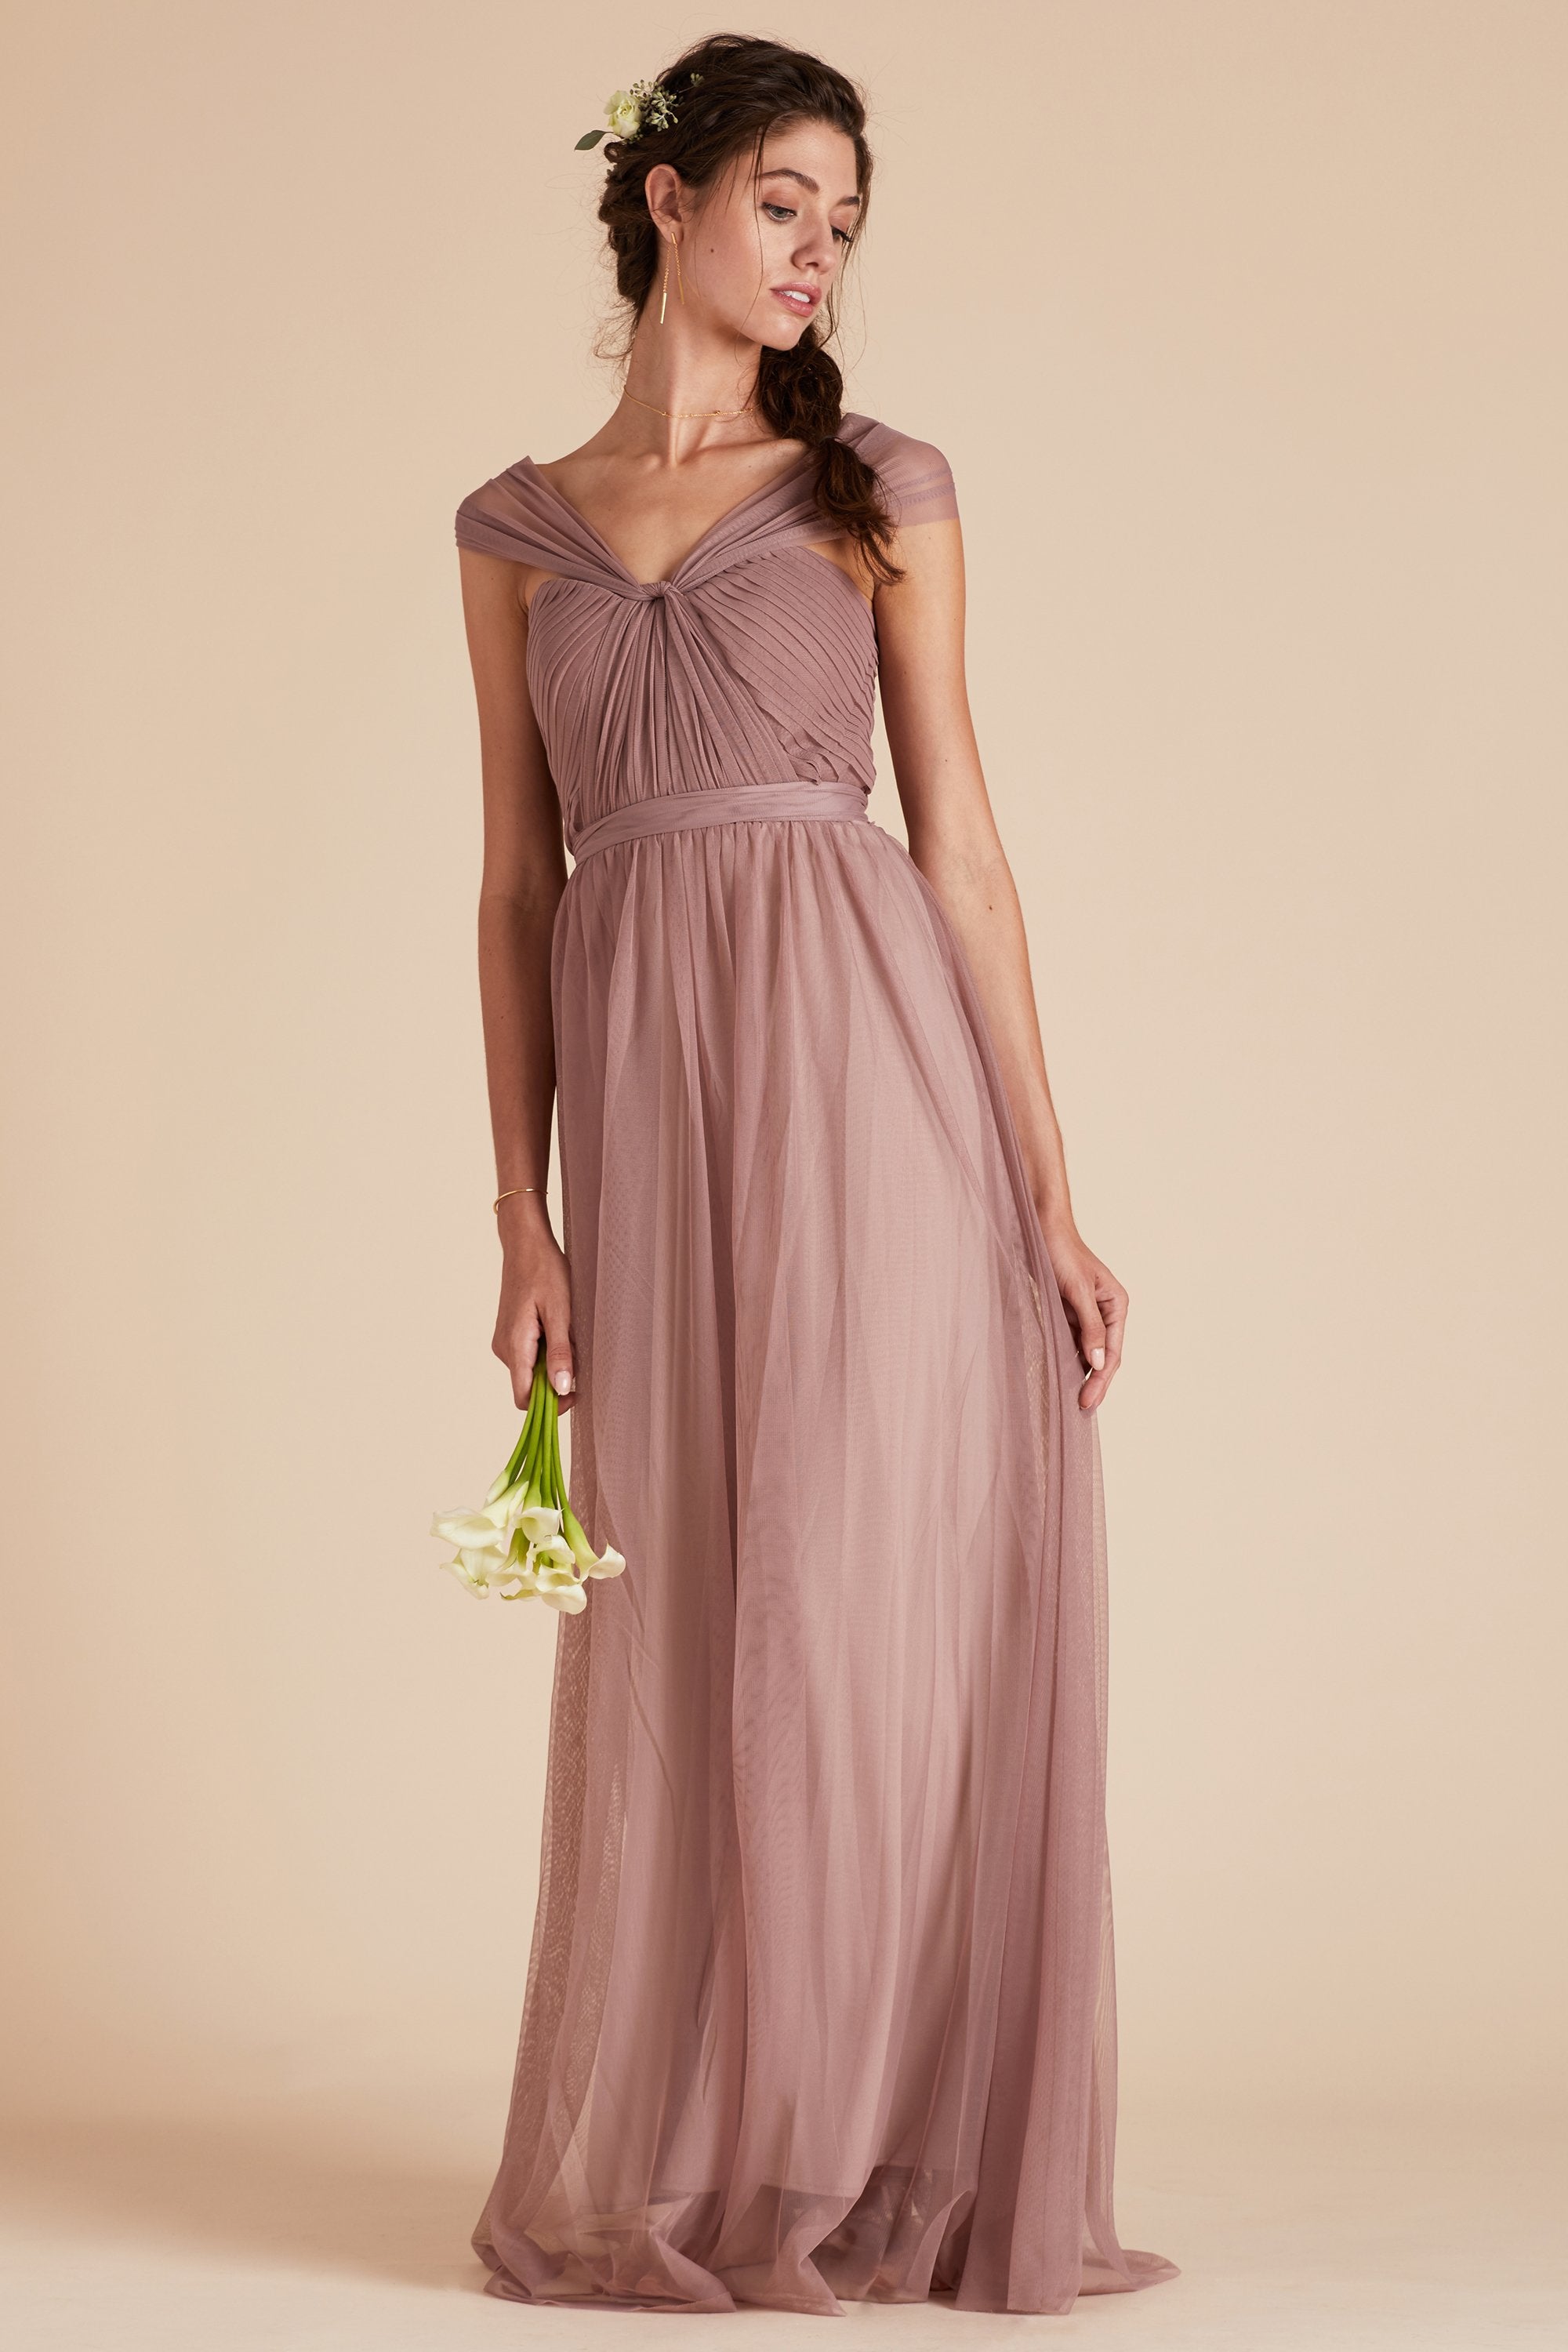 Christina convertible bridesmaid dress in sandy mauve tulle by Birdy Grey, front view